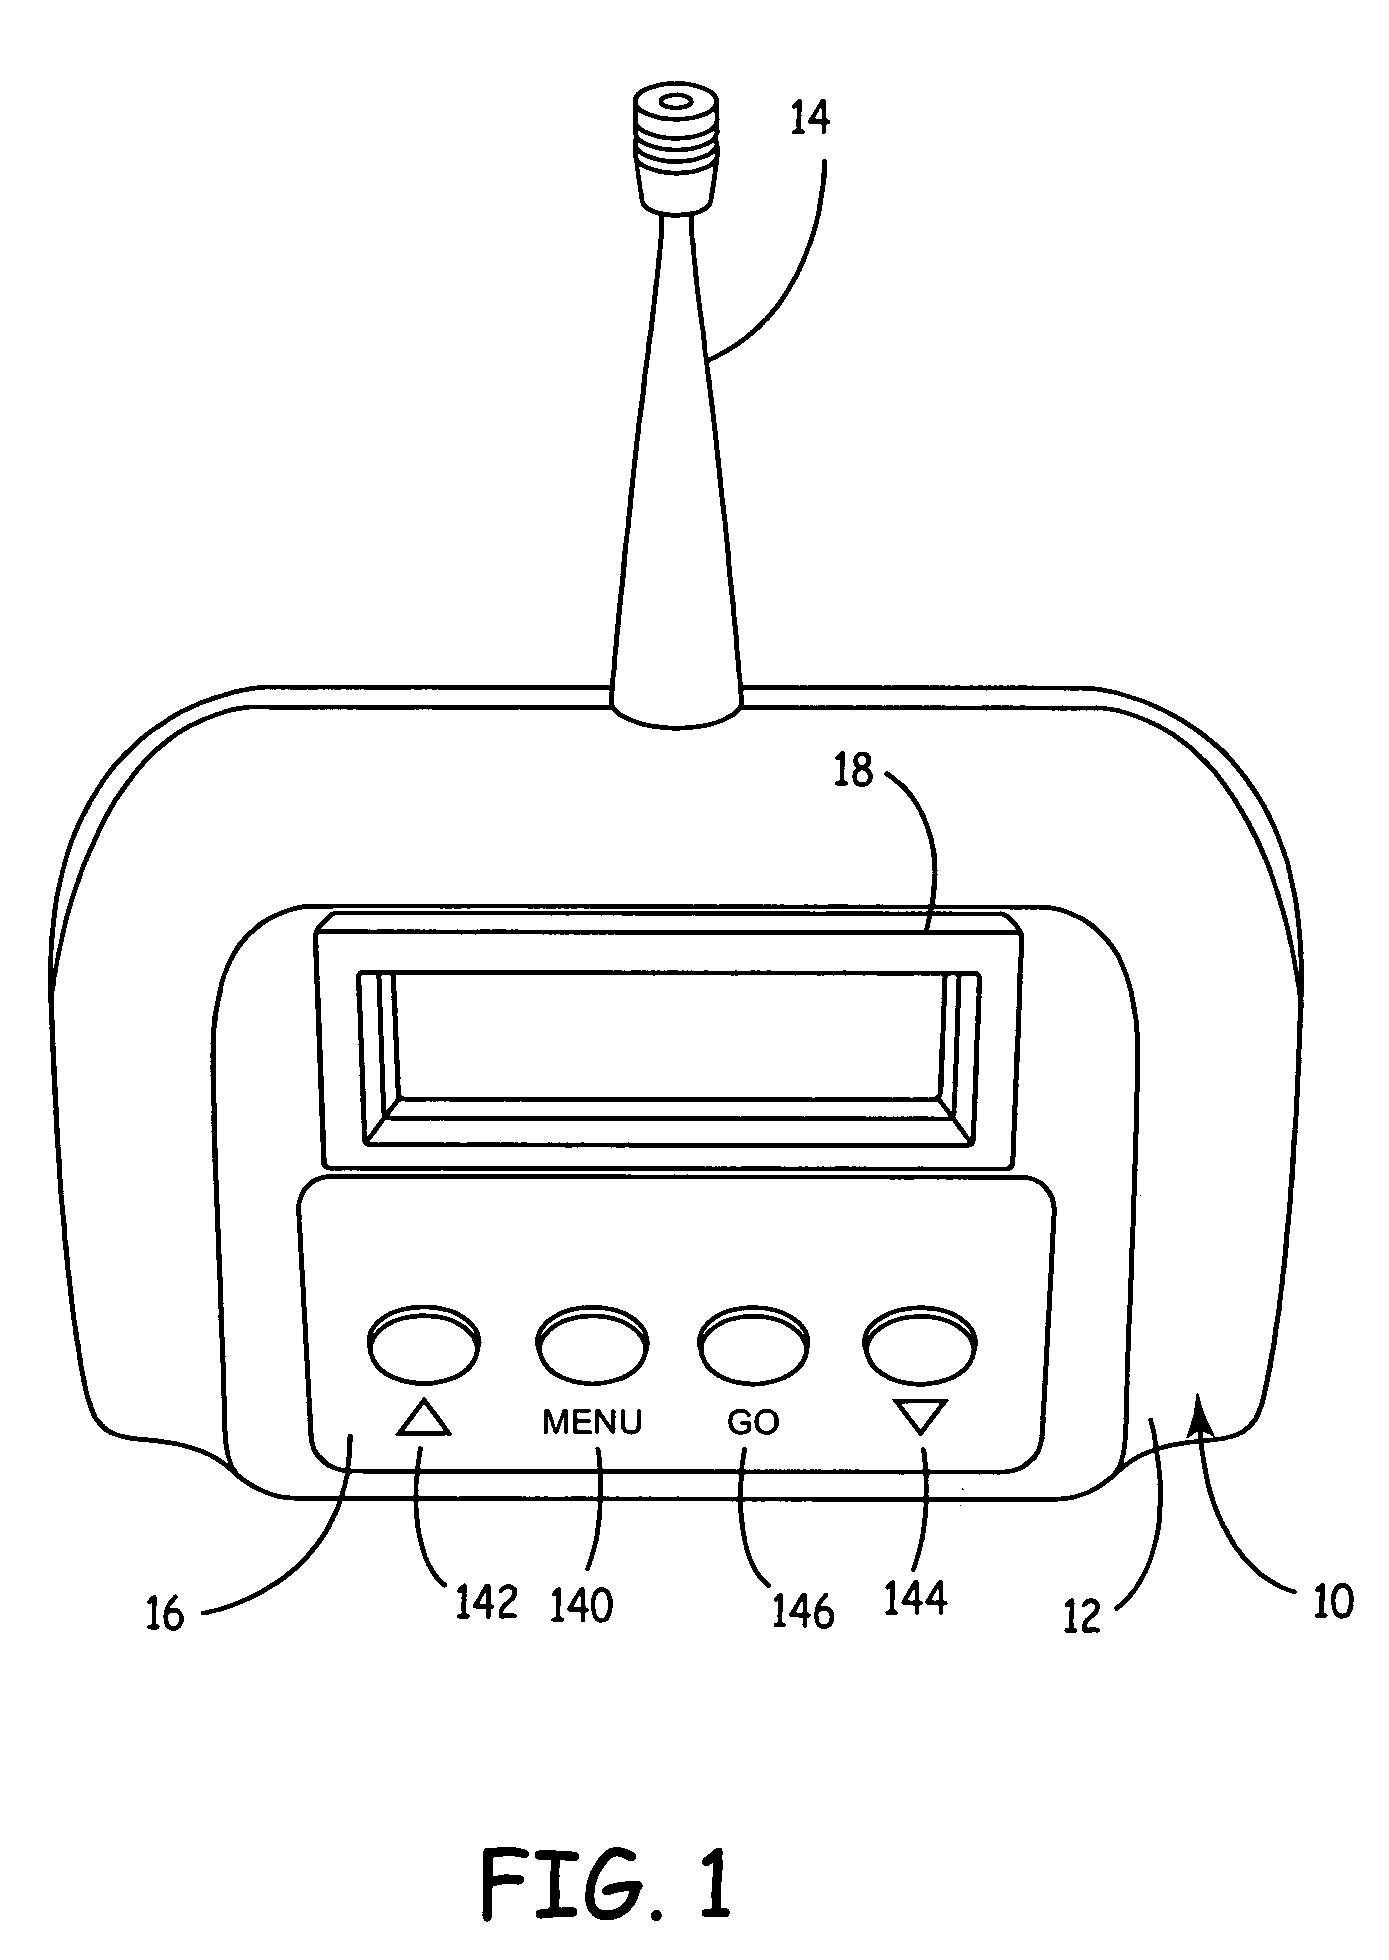 Method and apparatus for collecting and displaying consumption data from a meter reading system